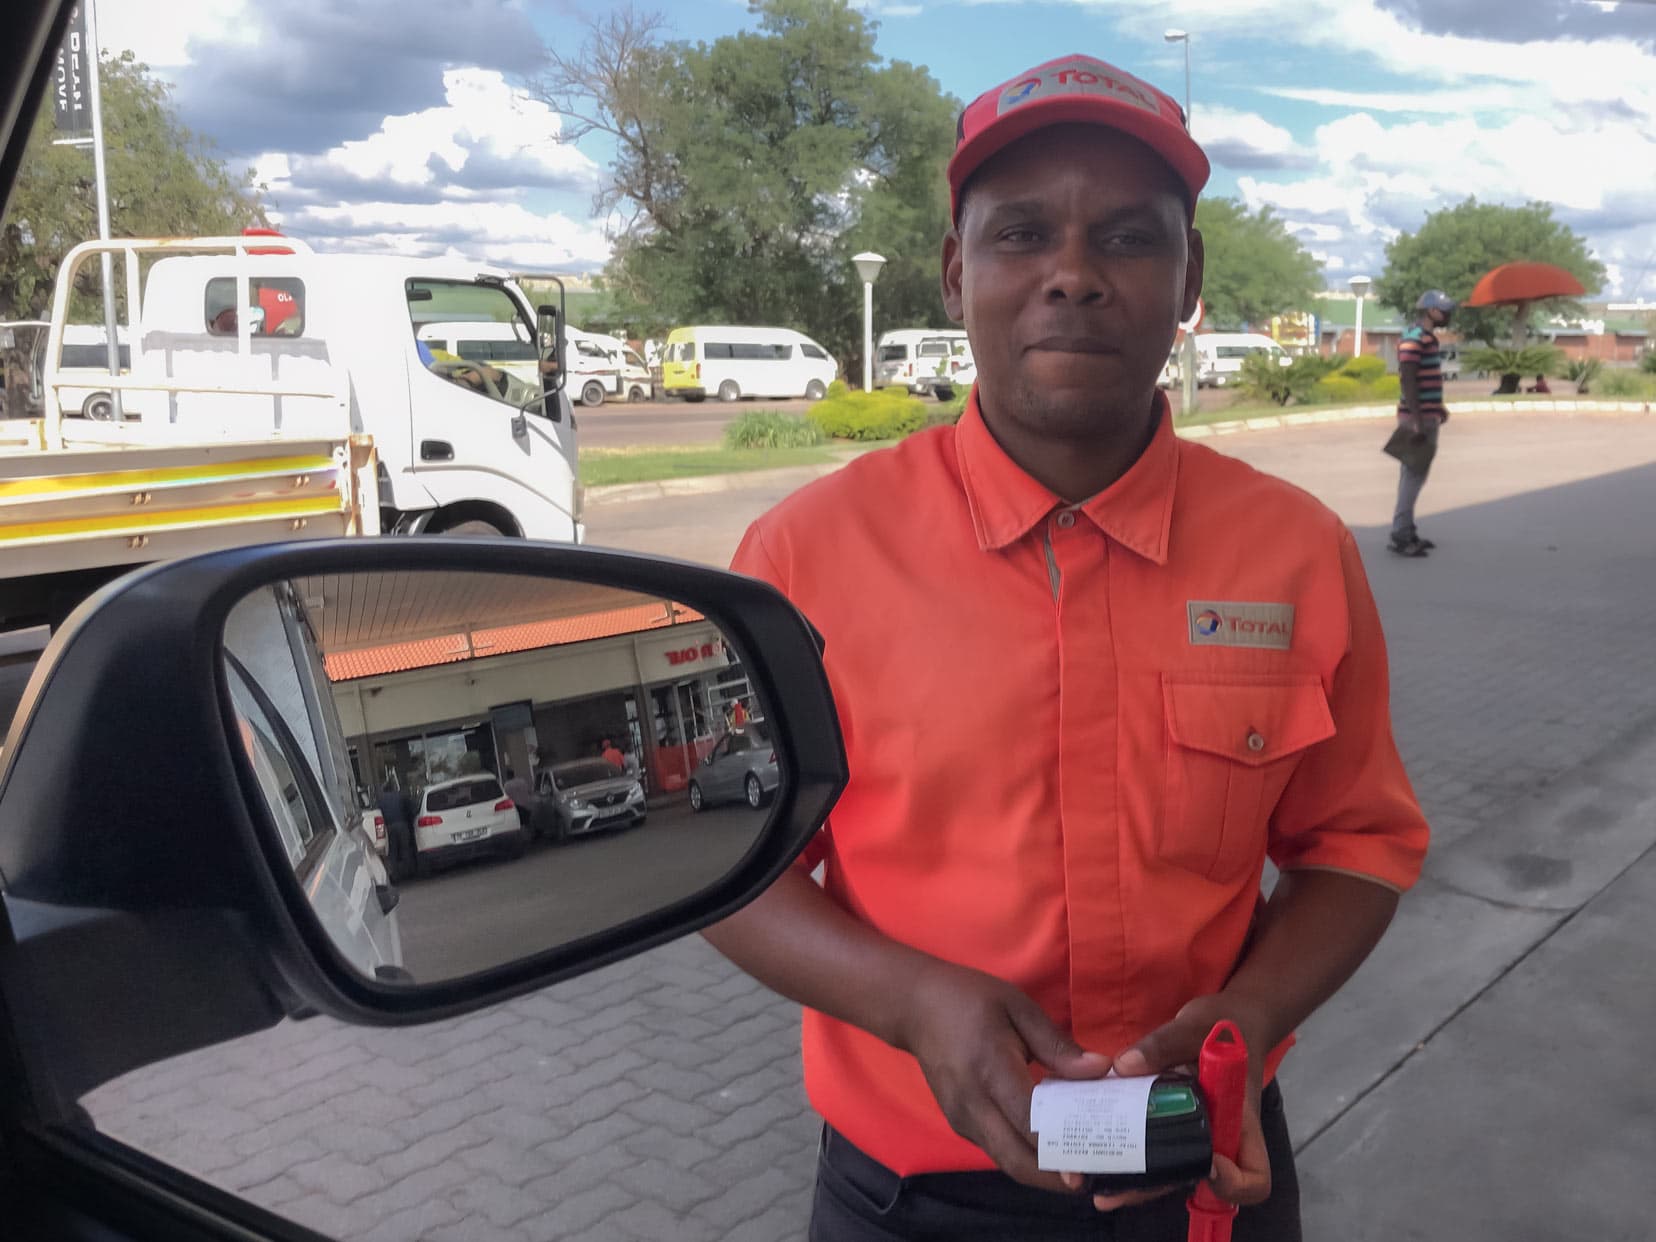 fuel attendant at our Hilux window